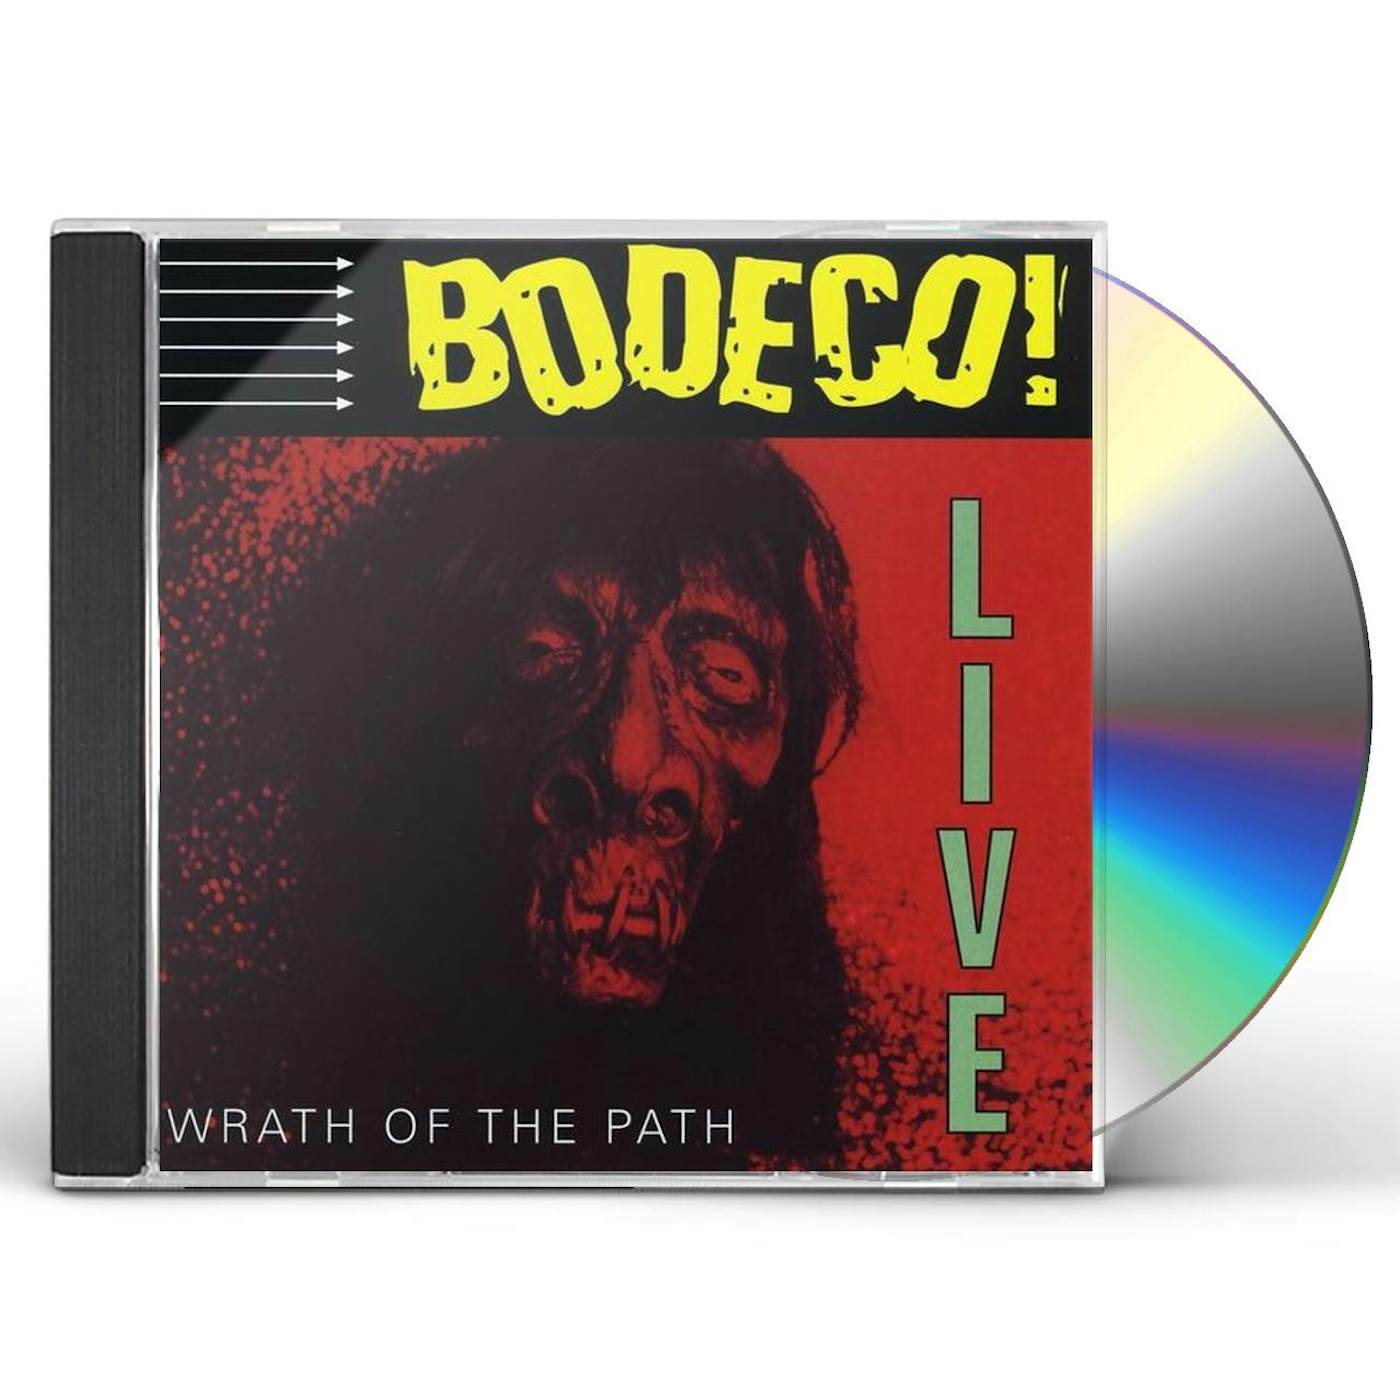 Bodeco WRATH OF THE PATH CD